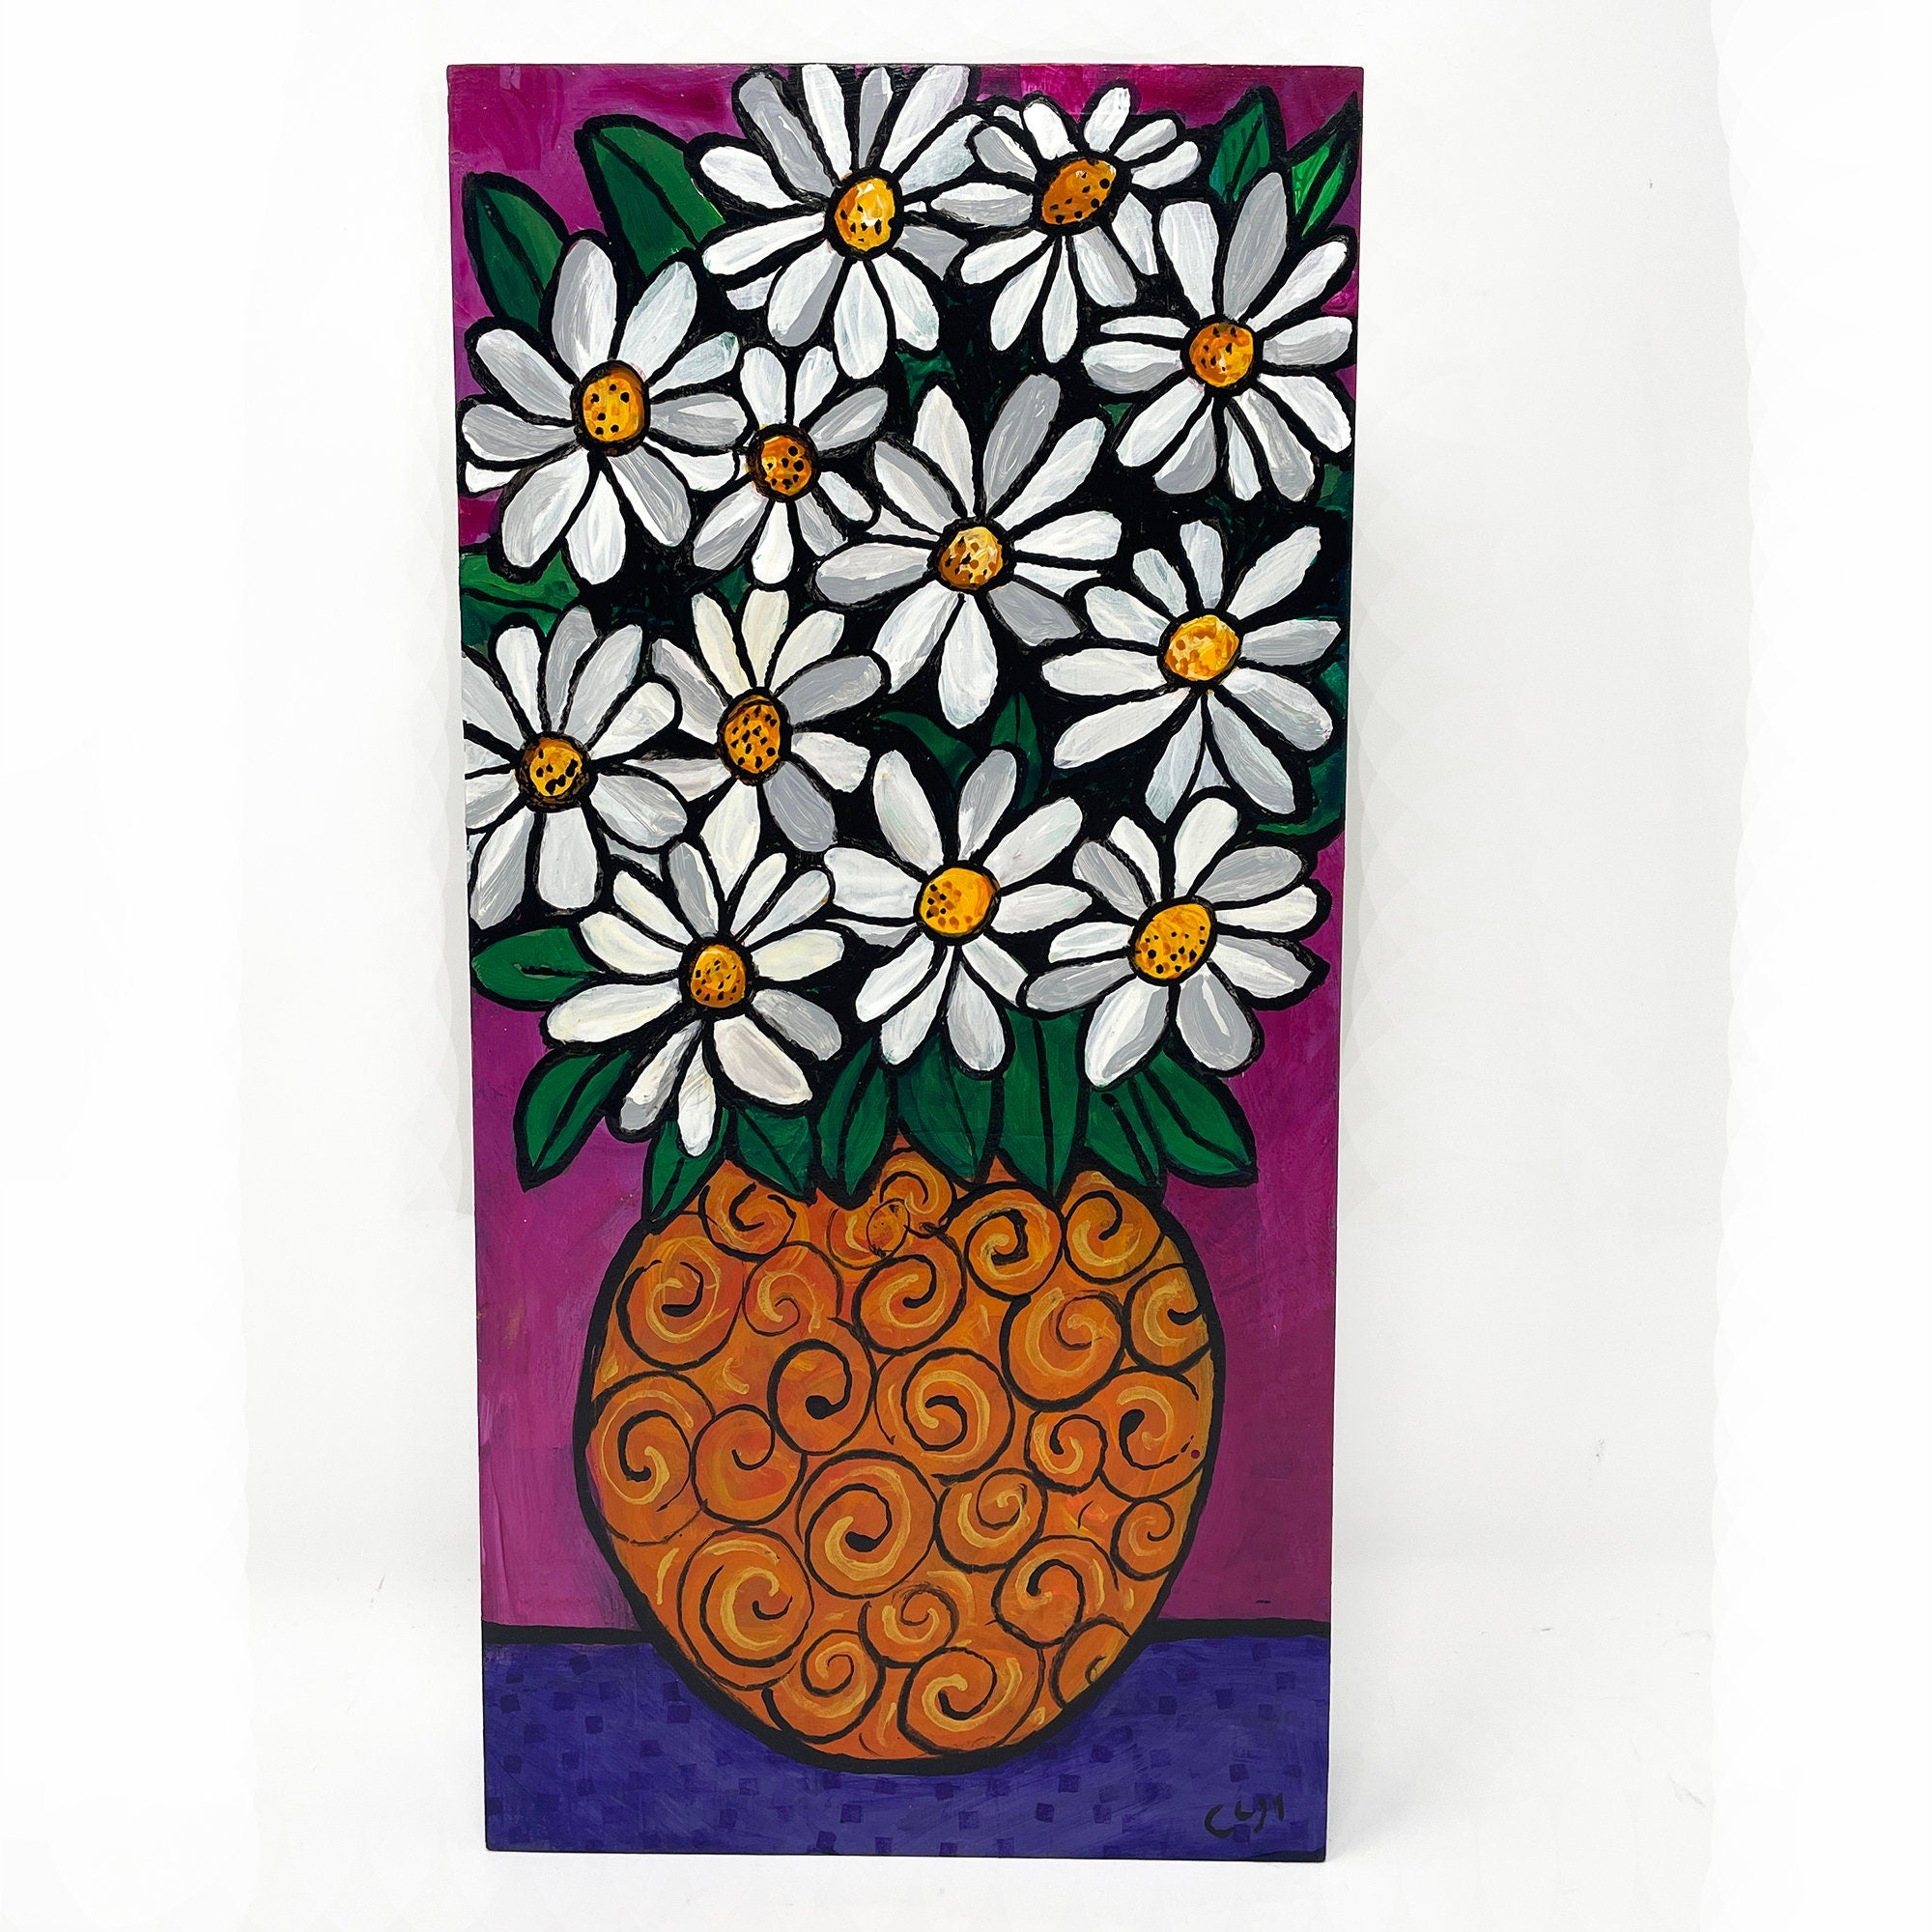 Whimsical Daisy Still Life Painting - Original Flower Art - Cheerful Happy Floral Art - Bold Colors - 6x12 Inches